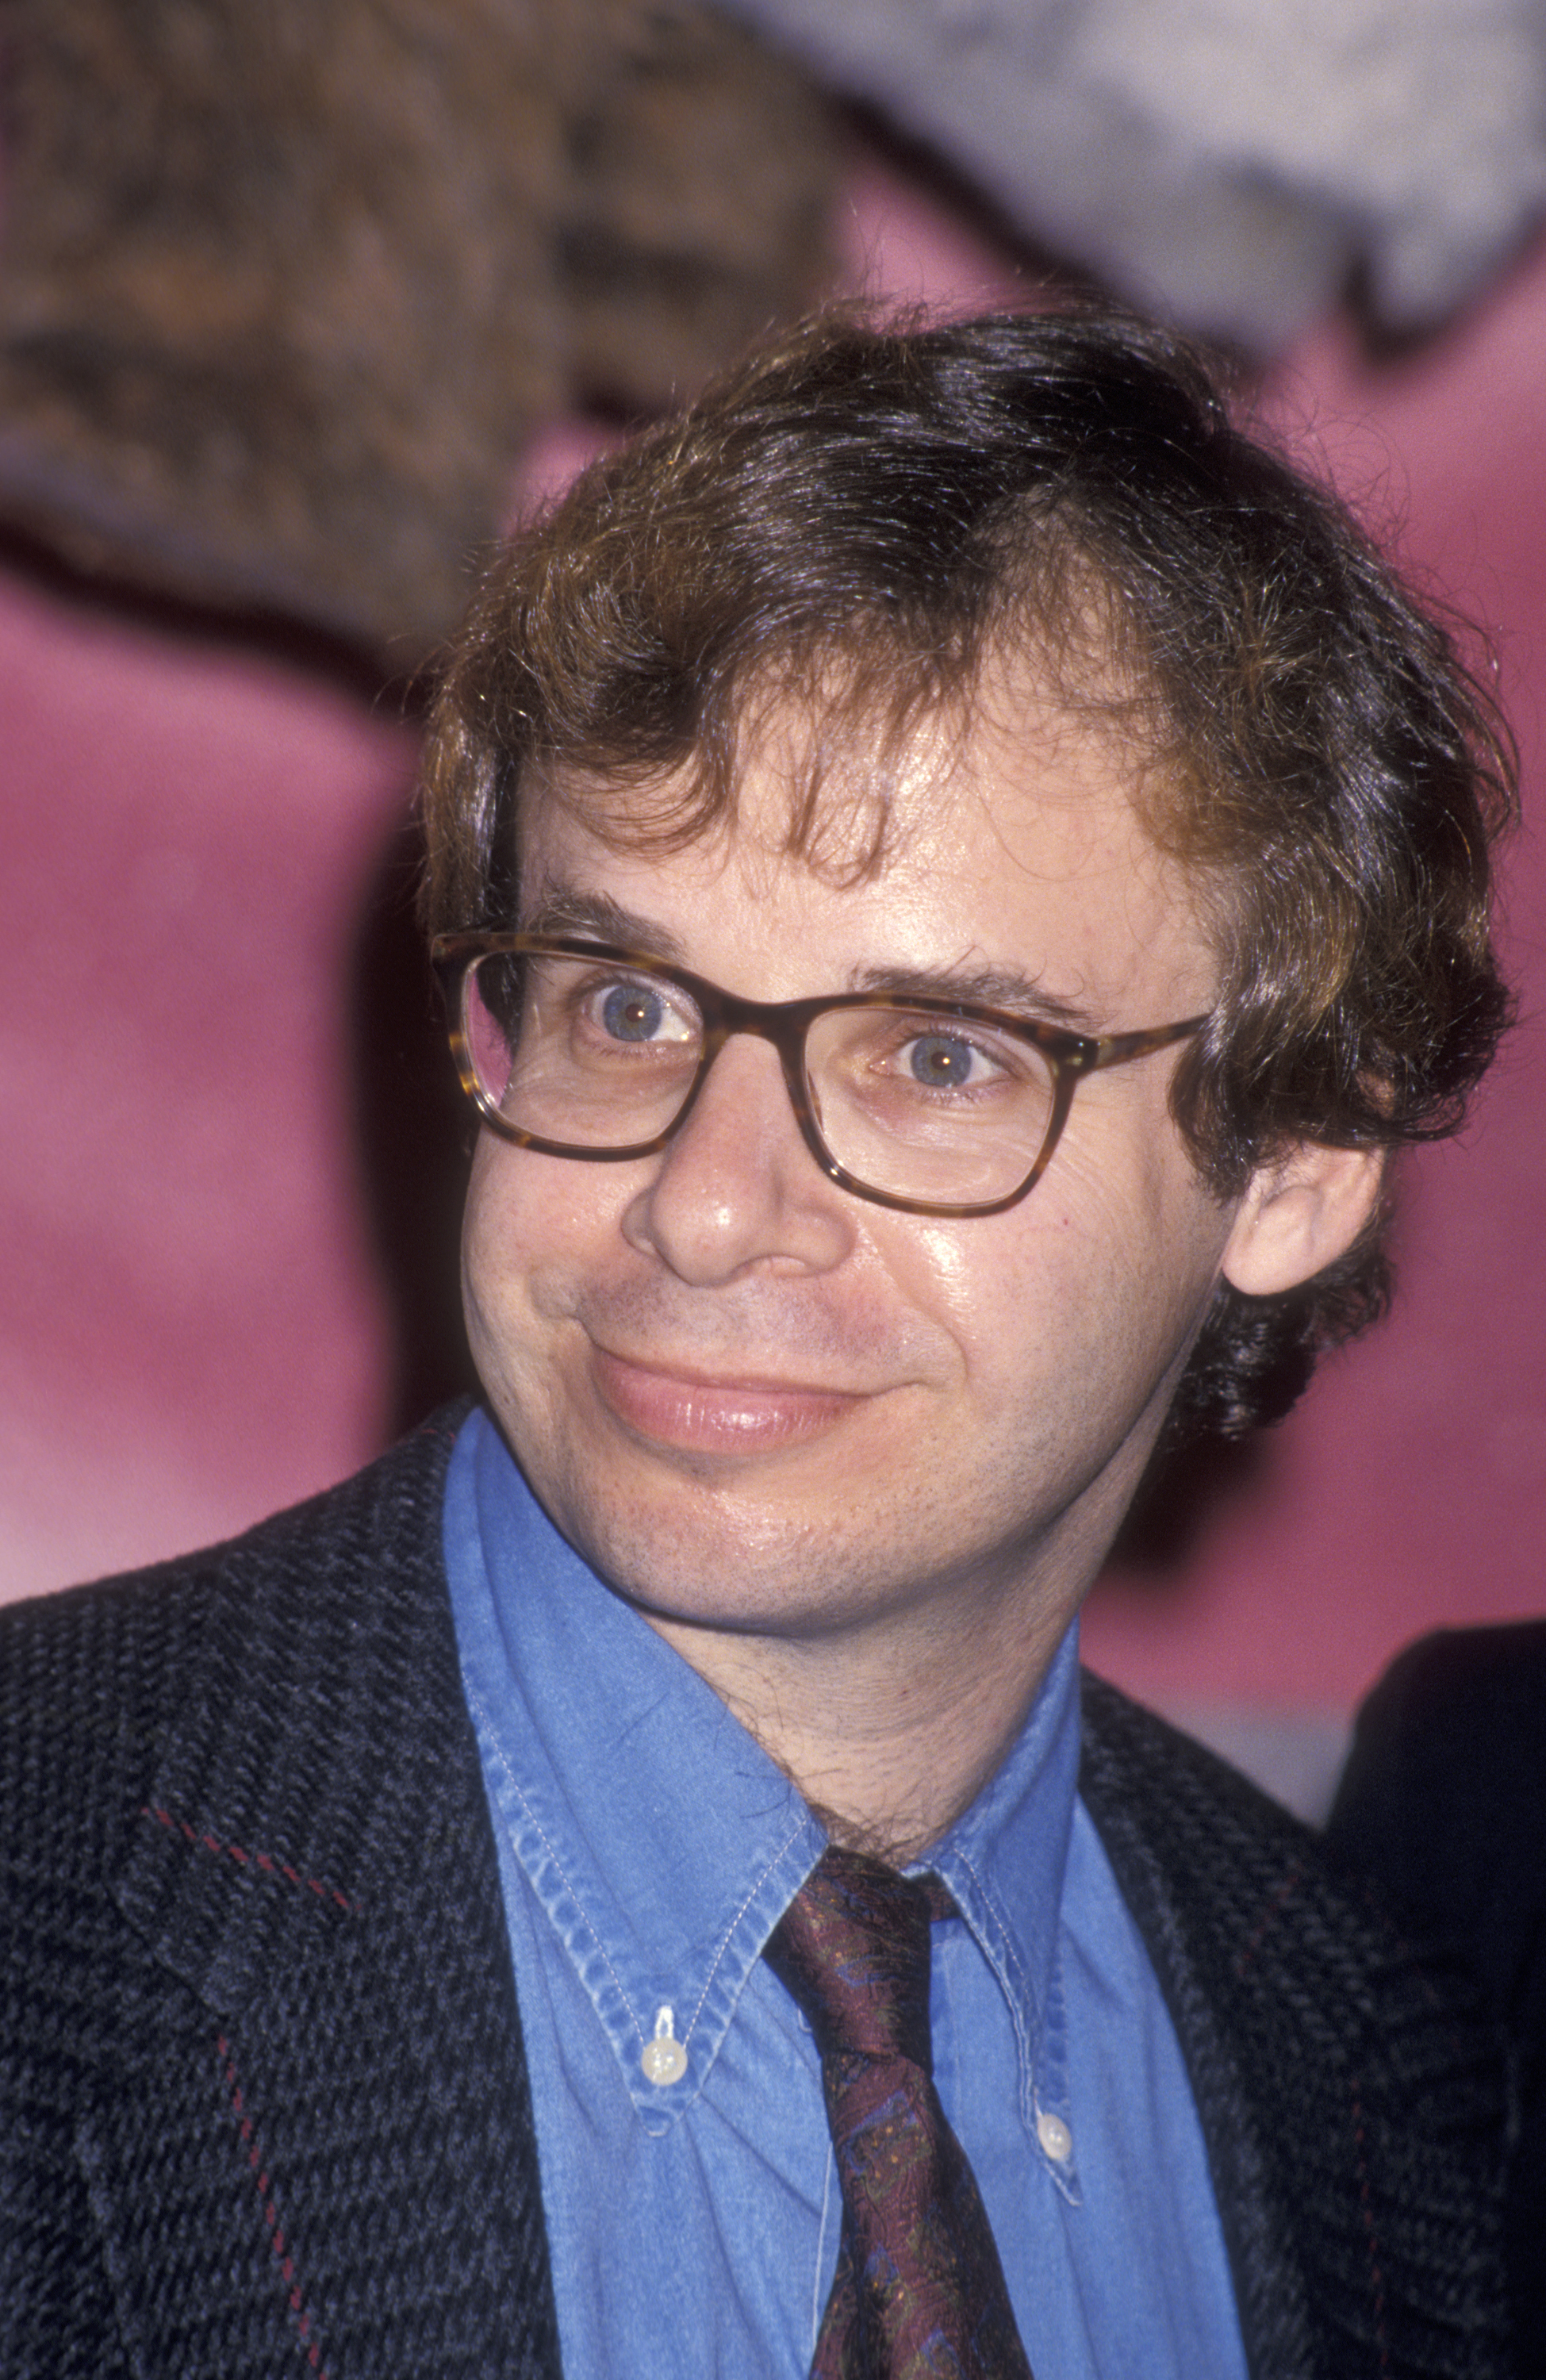 Rick Moranis attends NATO-ShoWest Convention at Bally's Hotel and Casino on March 9, 1994 in Las Vegas, Nevada. | Source: Getty Images